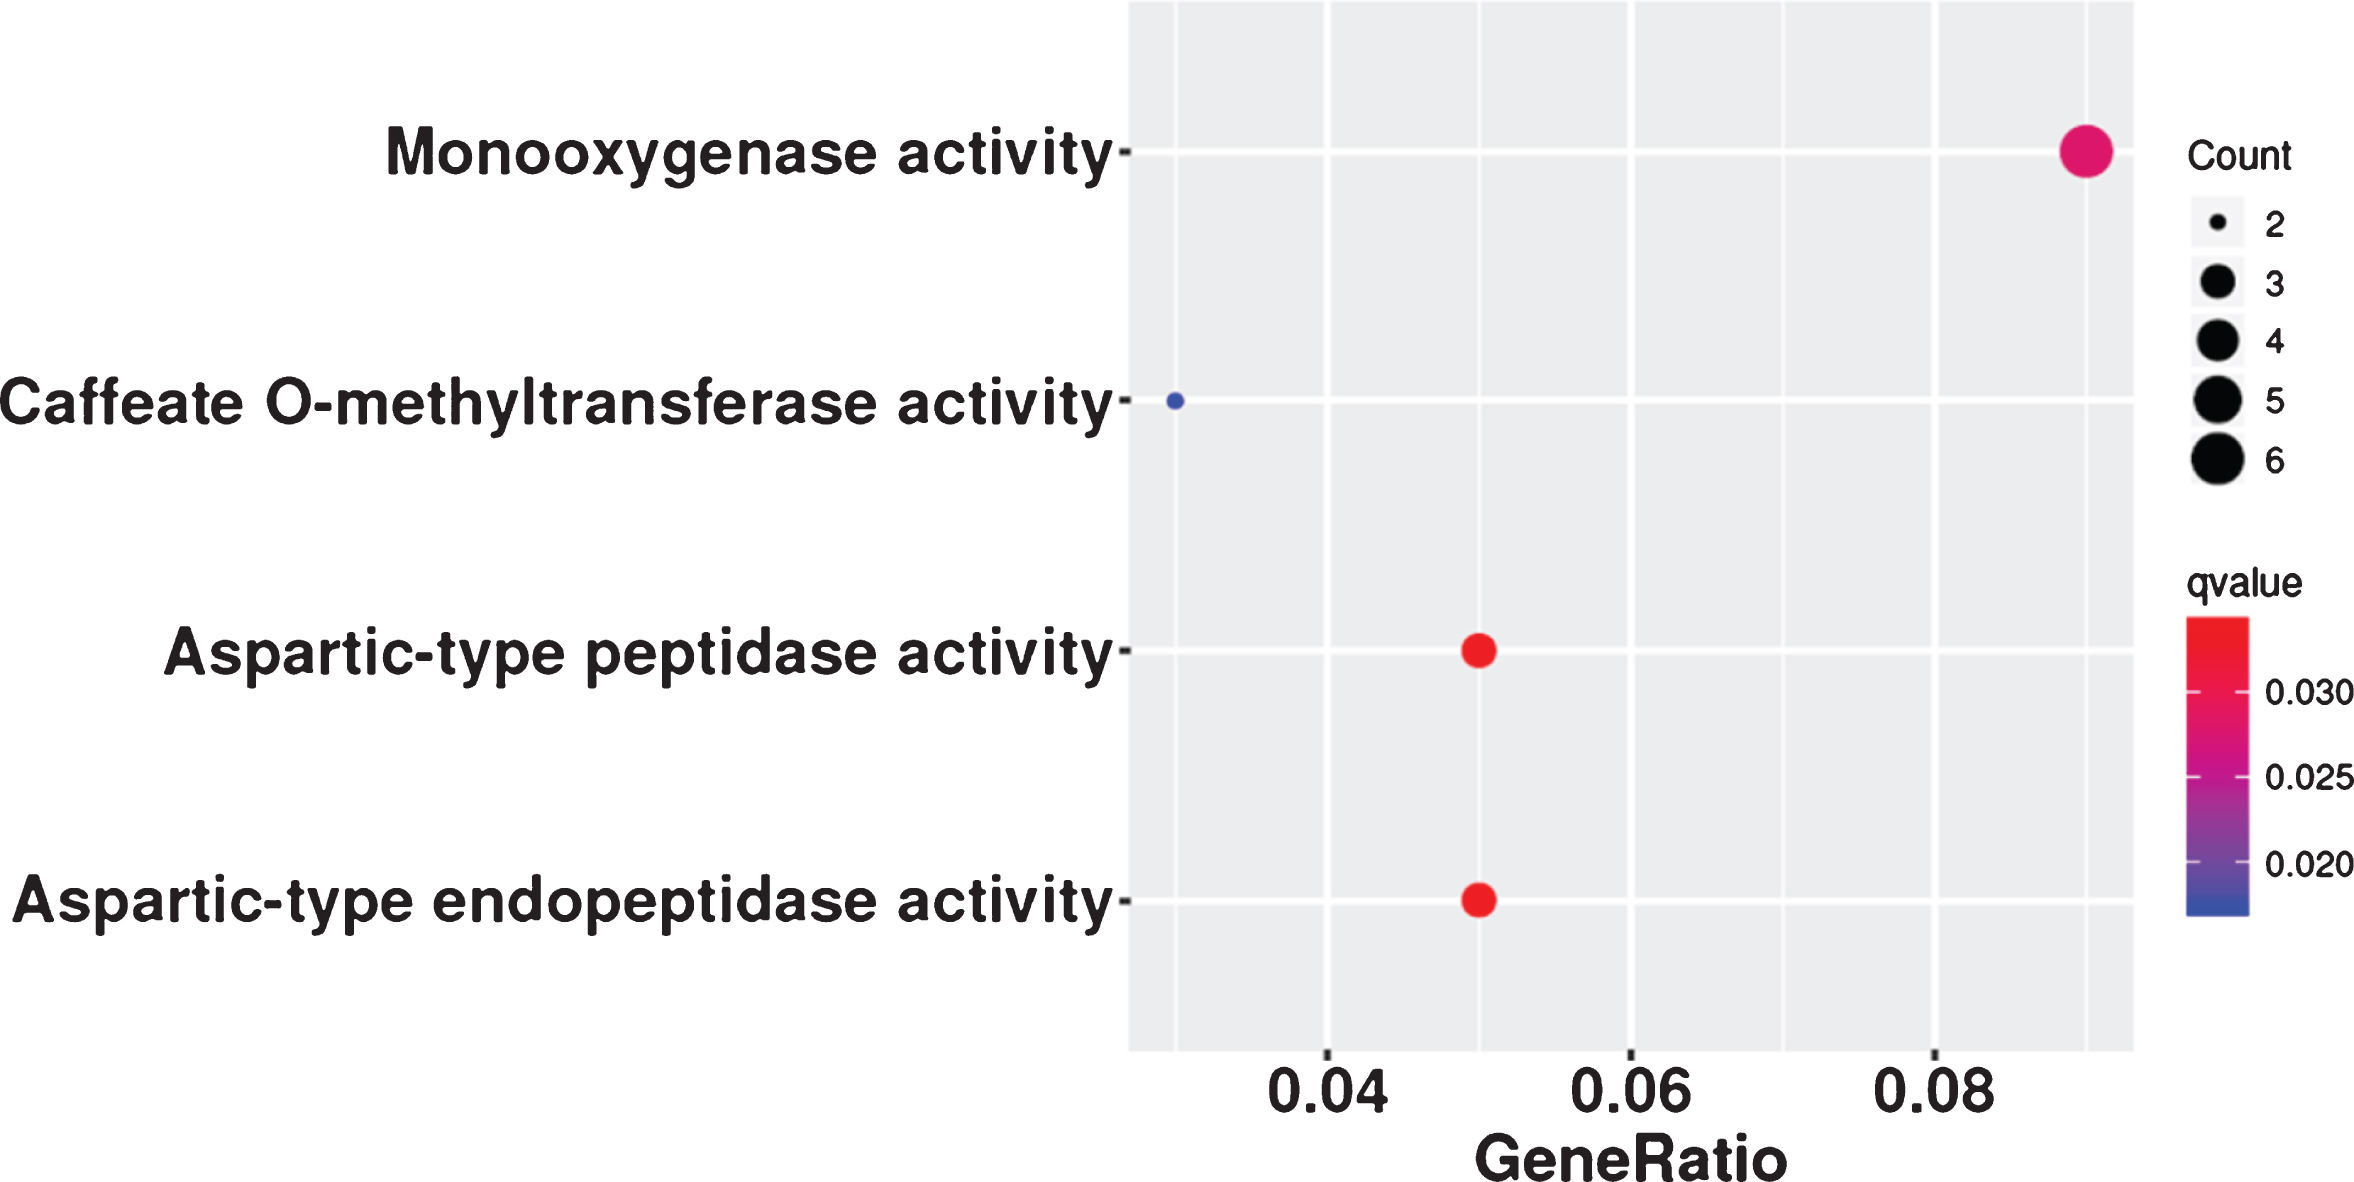 GO terms in molecular categories from GO enrichment analysis of 86 overlapping mRNAs. Enrichment term is represented by colored dots (blue indicates high enrichment and red indicates low enrichment).